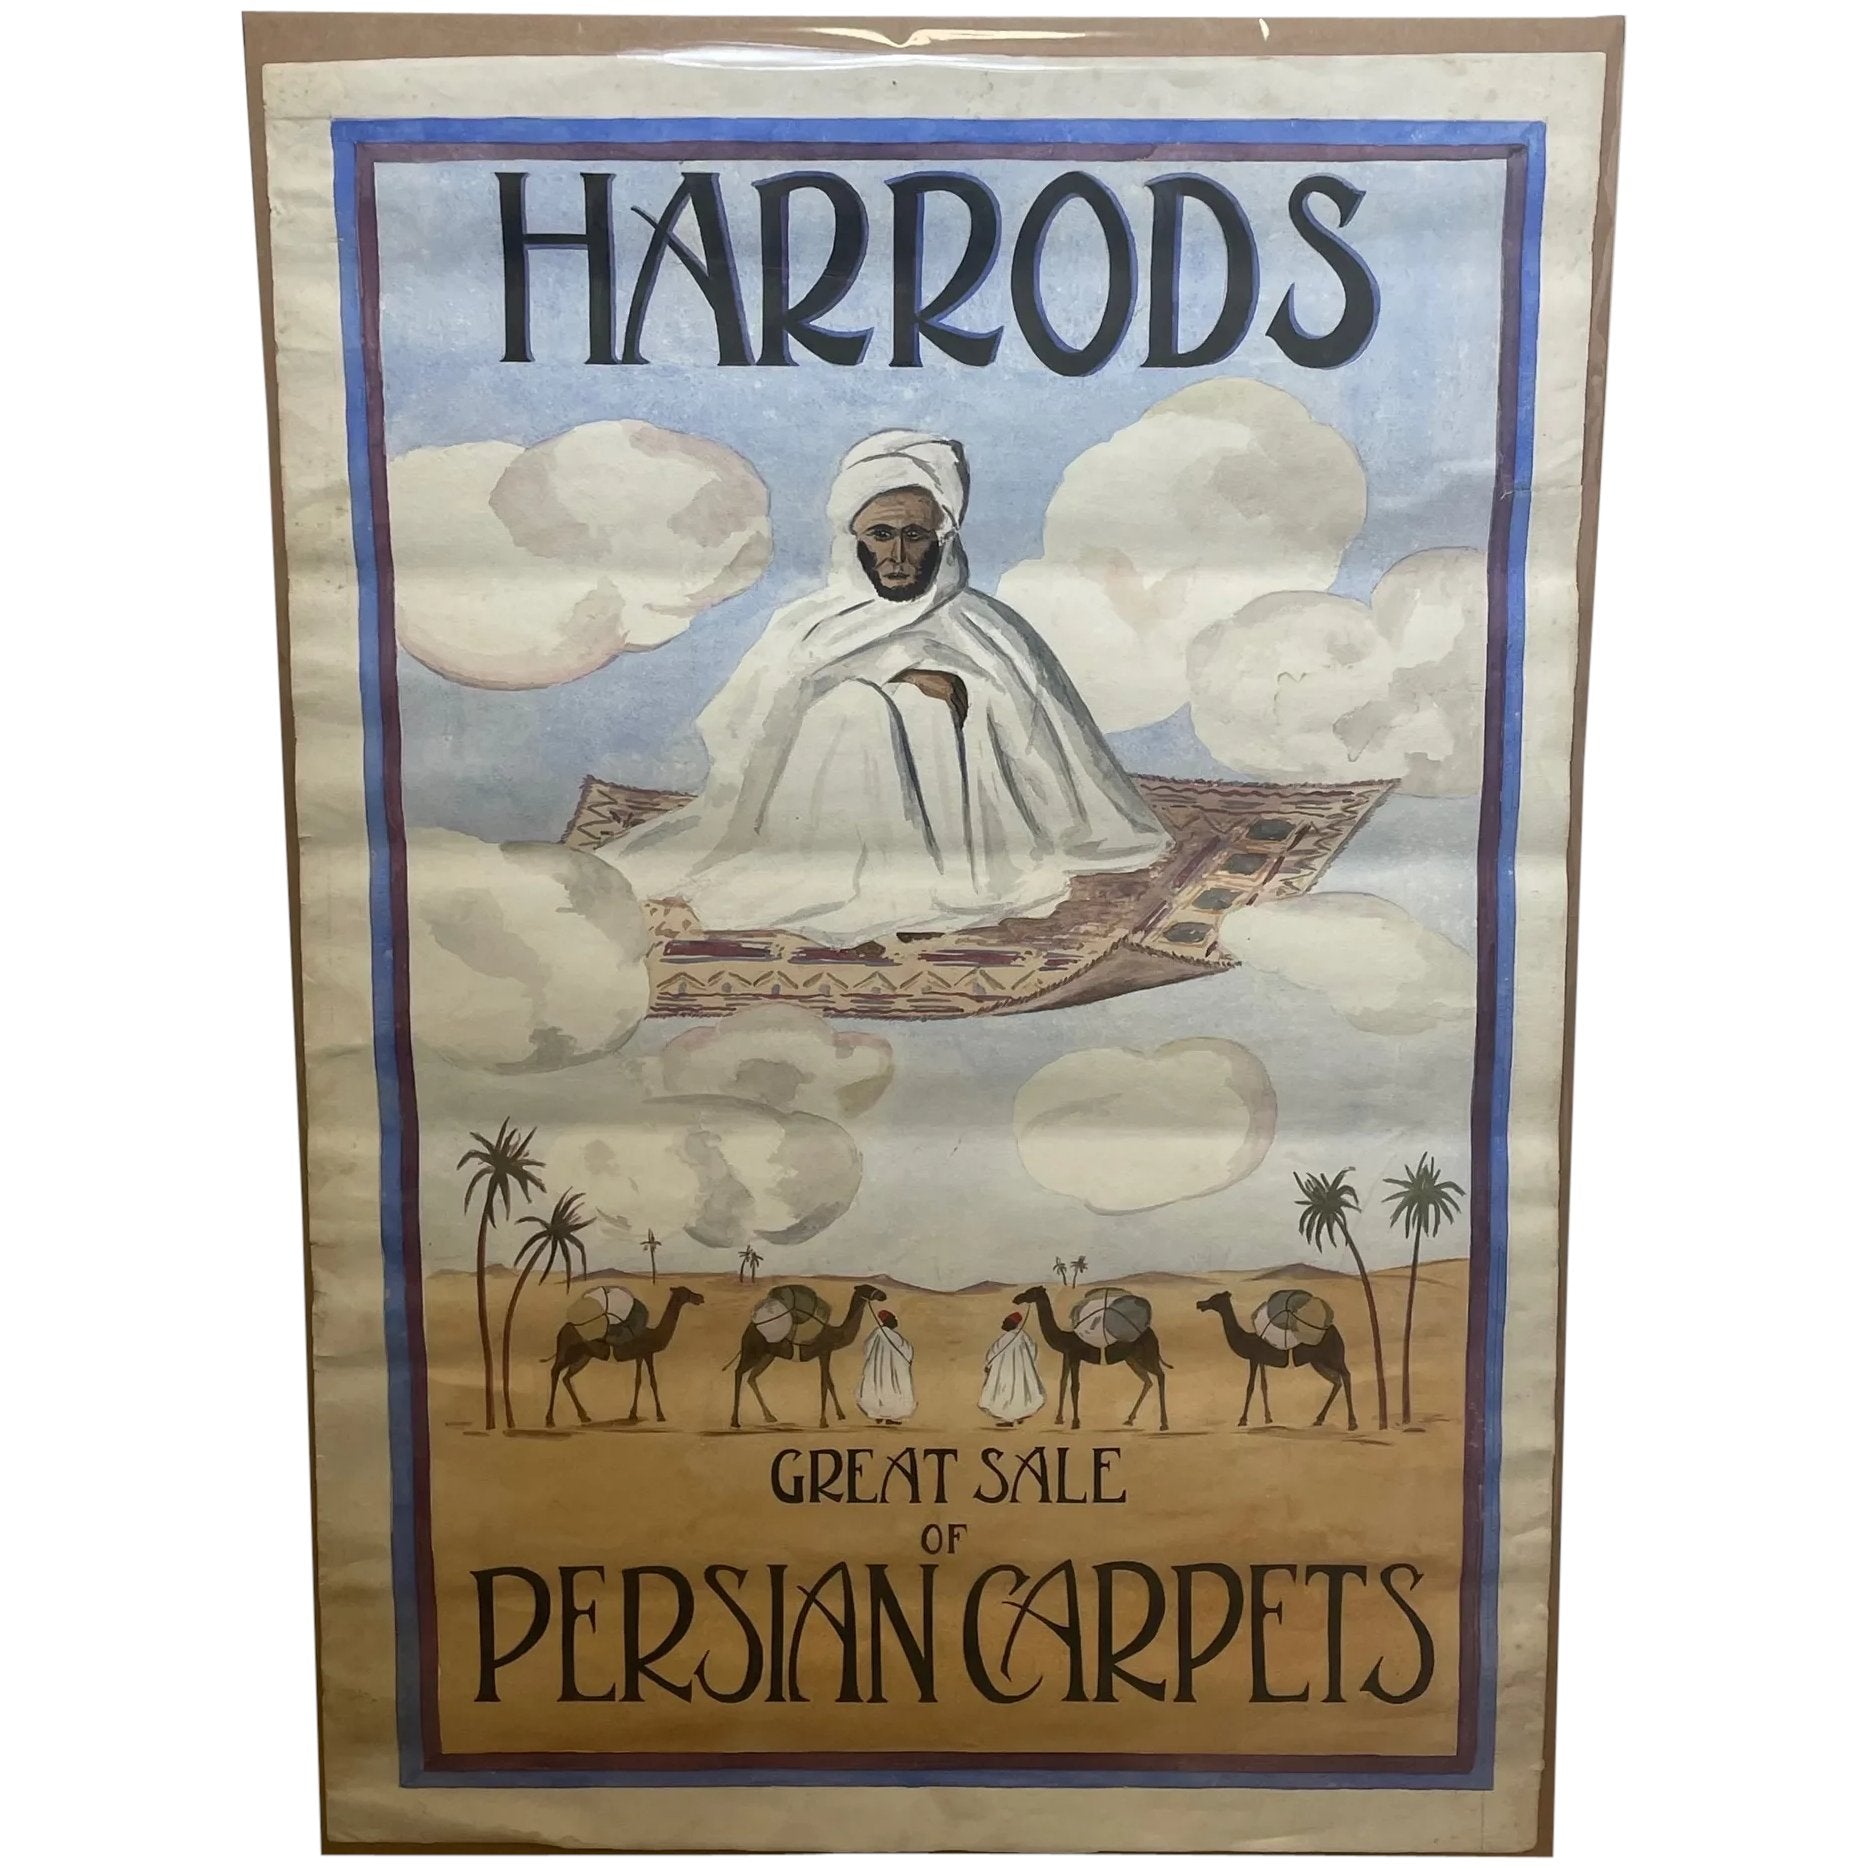 Original Harrods Poster "Great Sale Of Persian Carpets" - Cheshire Antiques Consultant